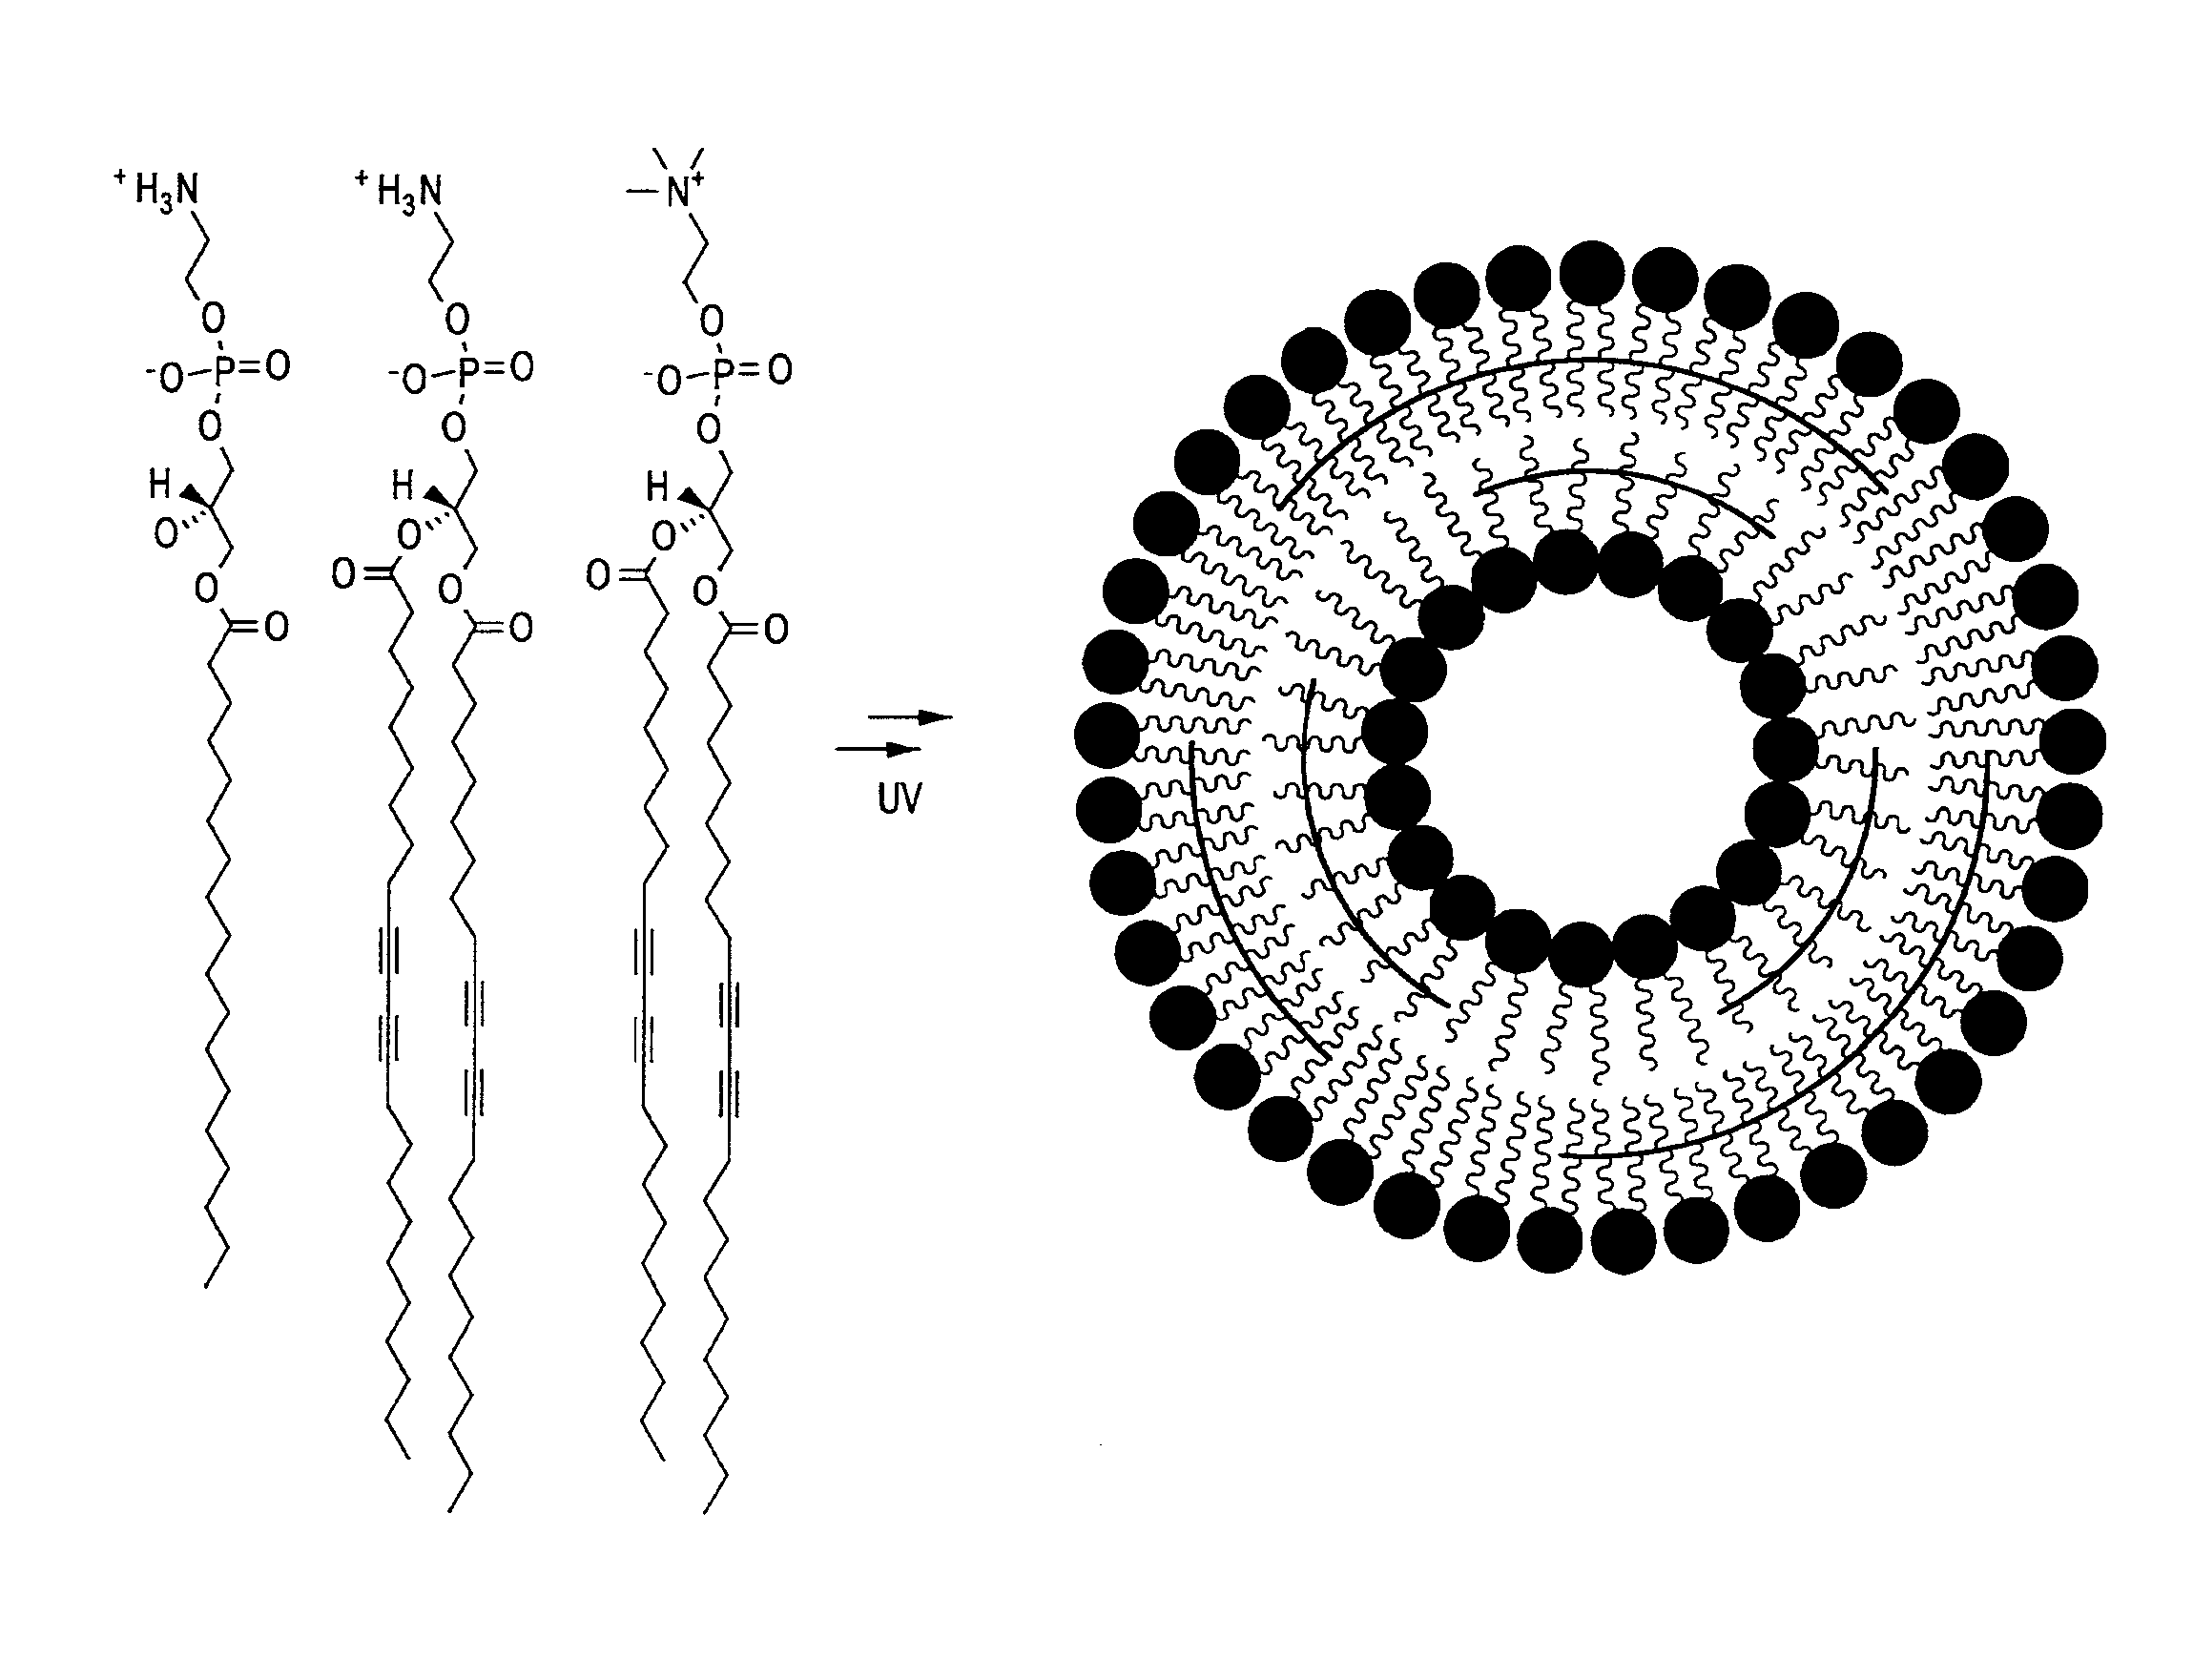 Thermally-activatable liposome compositions and methods for imaging, diagnosis and therapy